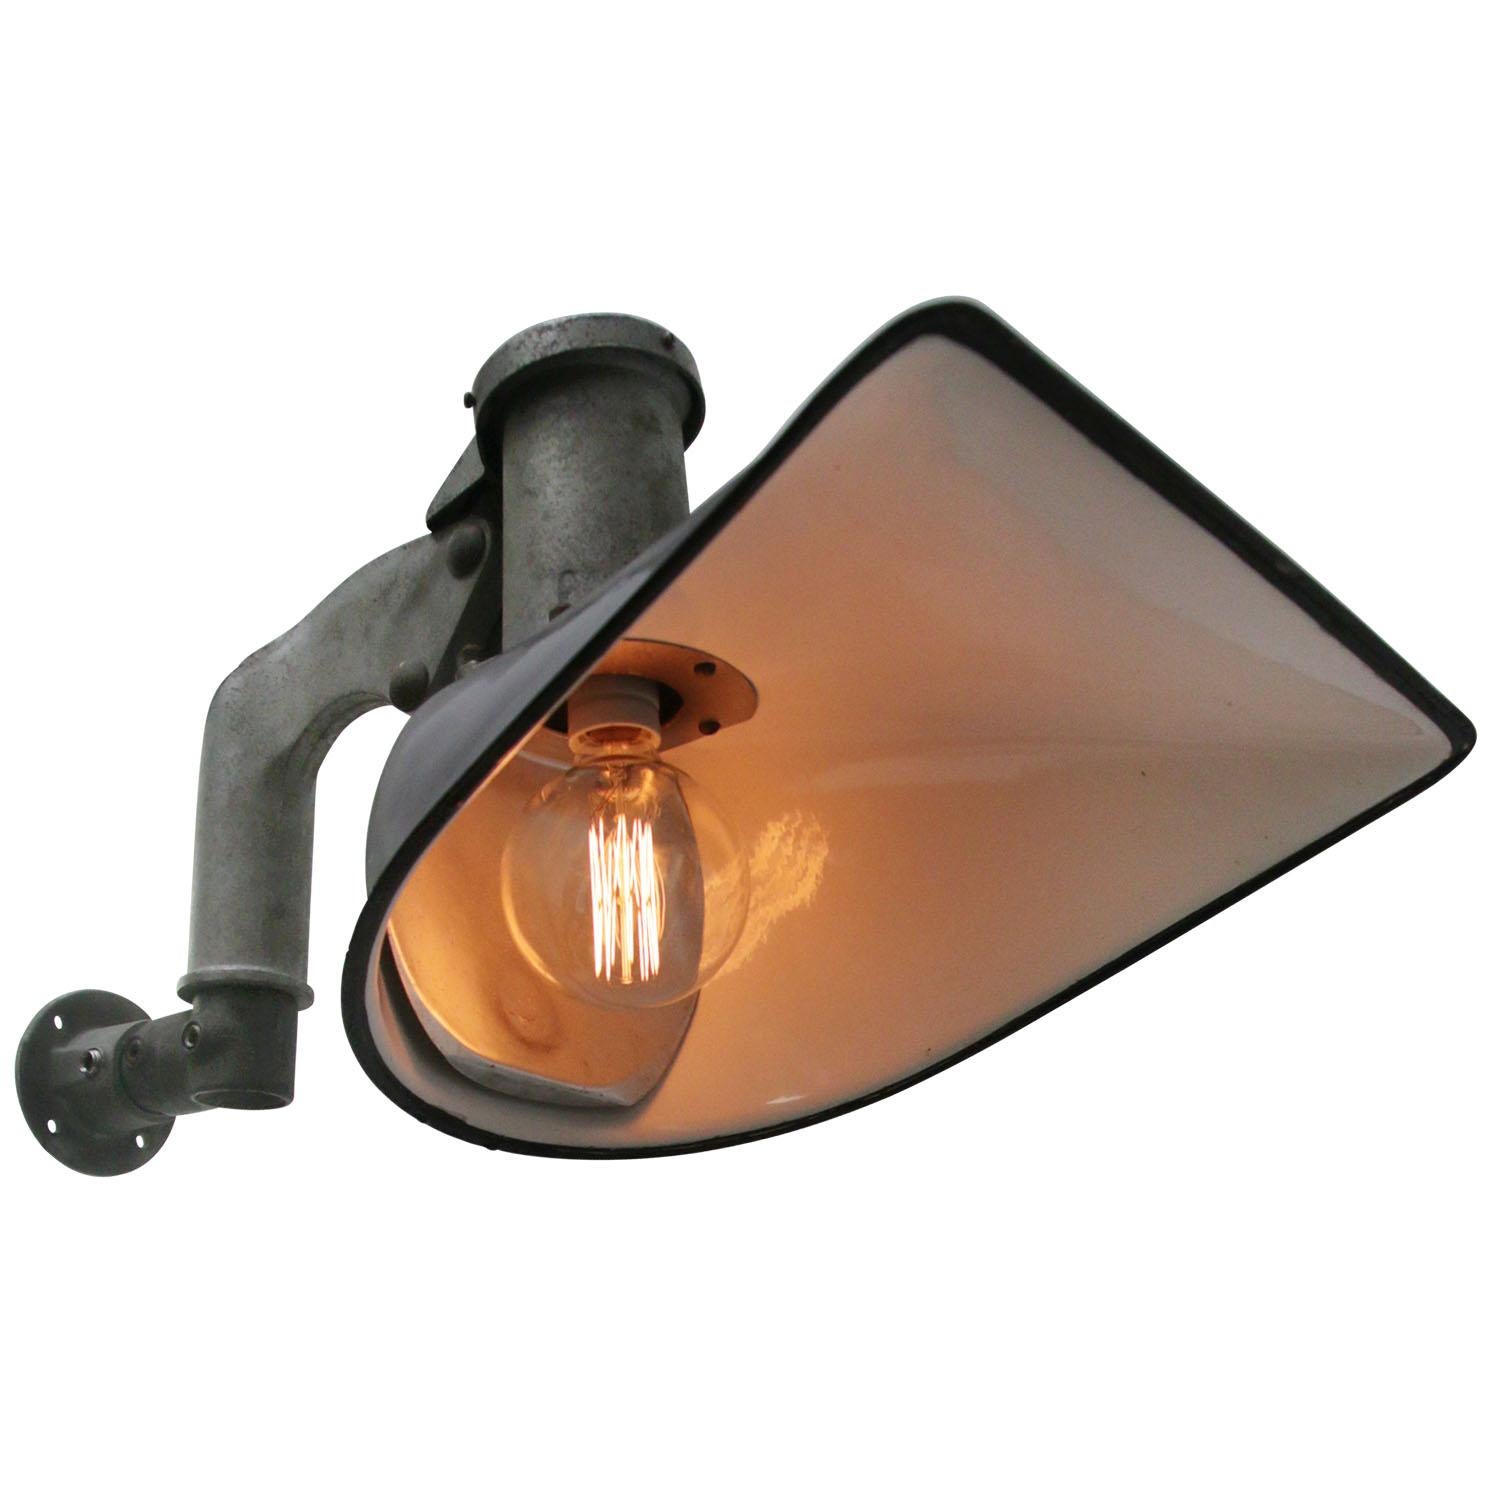 Gas station wall light. Benjamin UK
Adjustable in angle
Gray enamel, white interior

Weight: 8.70 kg / 19.2 lb

Priced per individual item. All lamps have been made suitable by international standards for incandescent light bulbs,